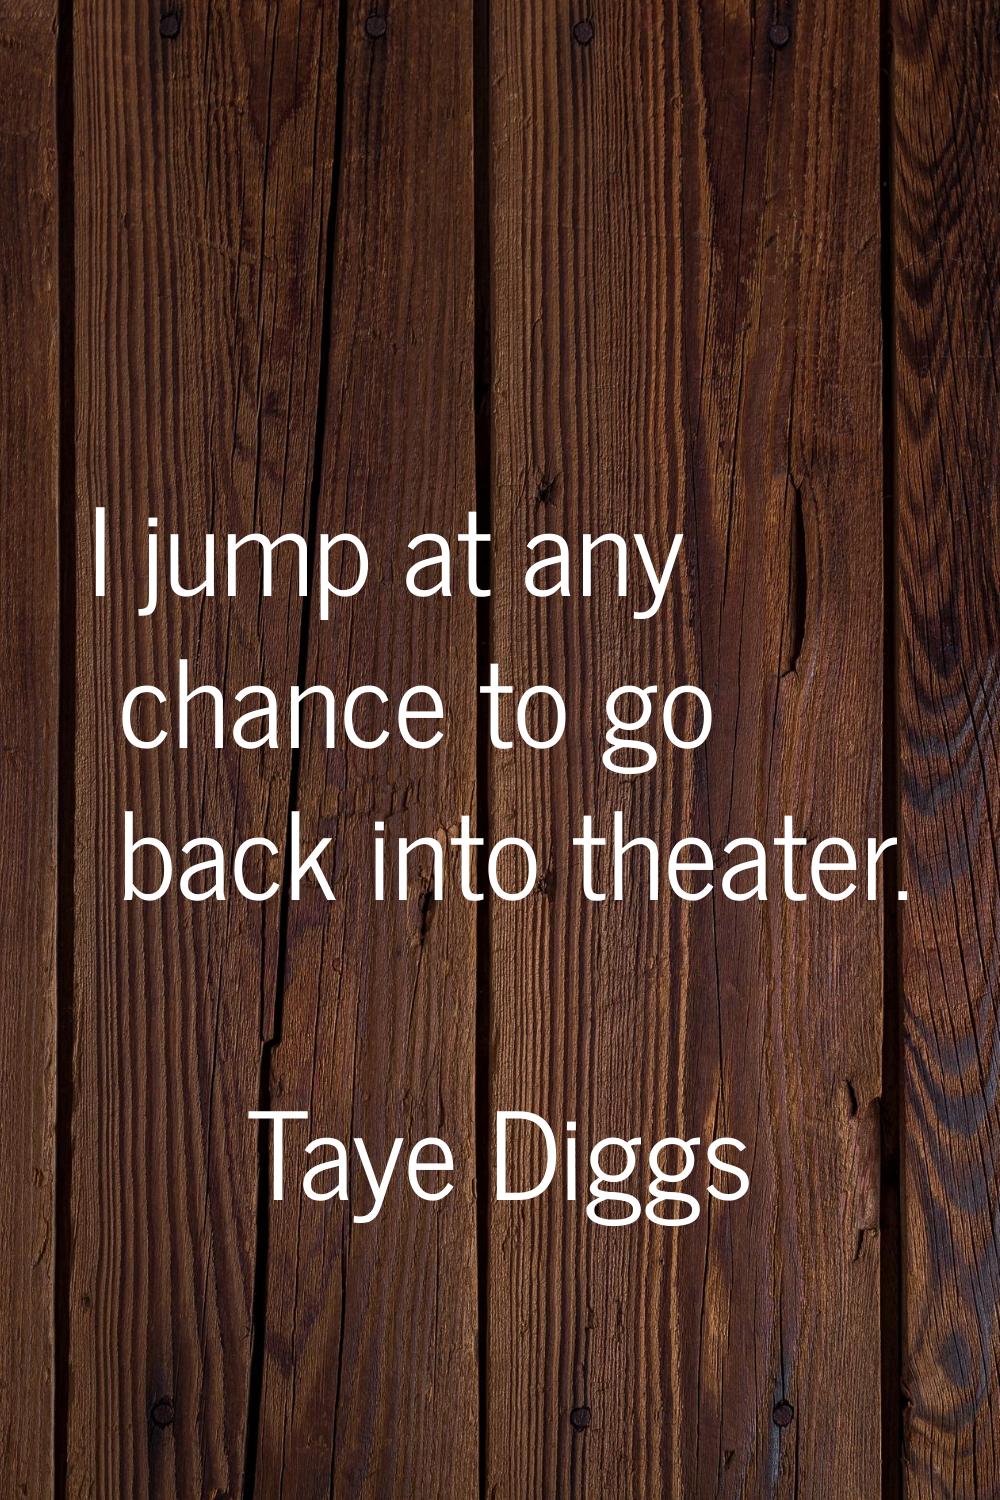 I jump at any chance to go back into theater.